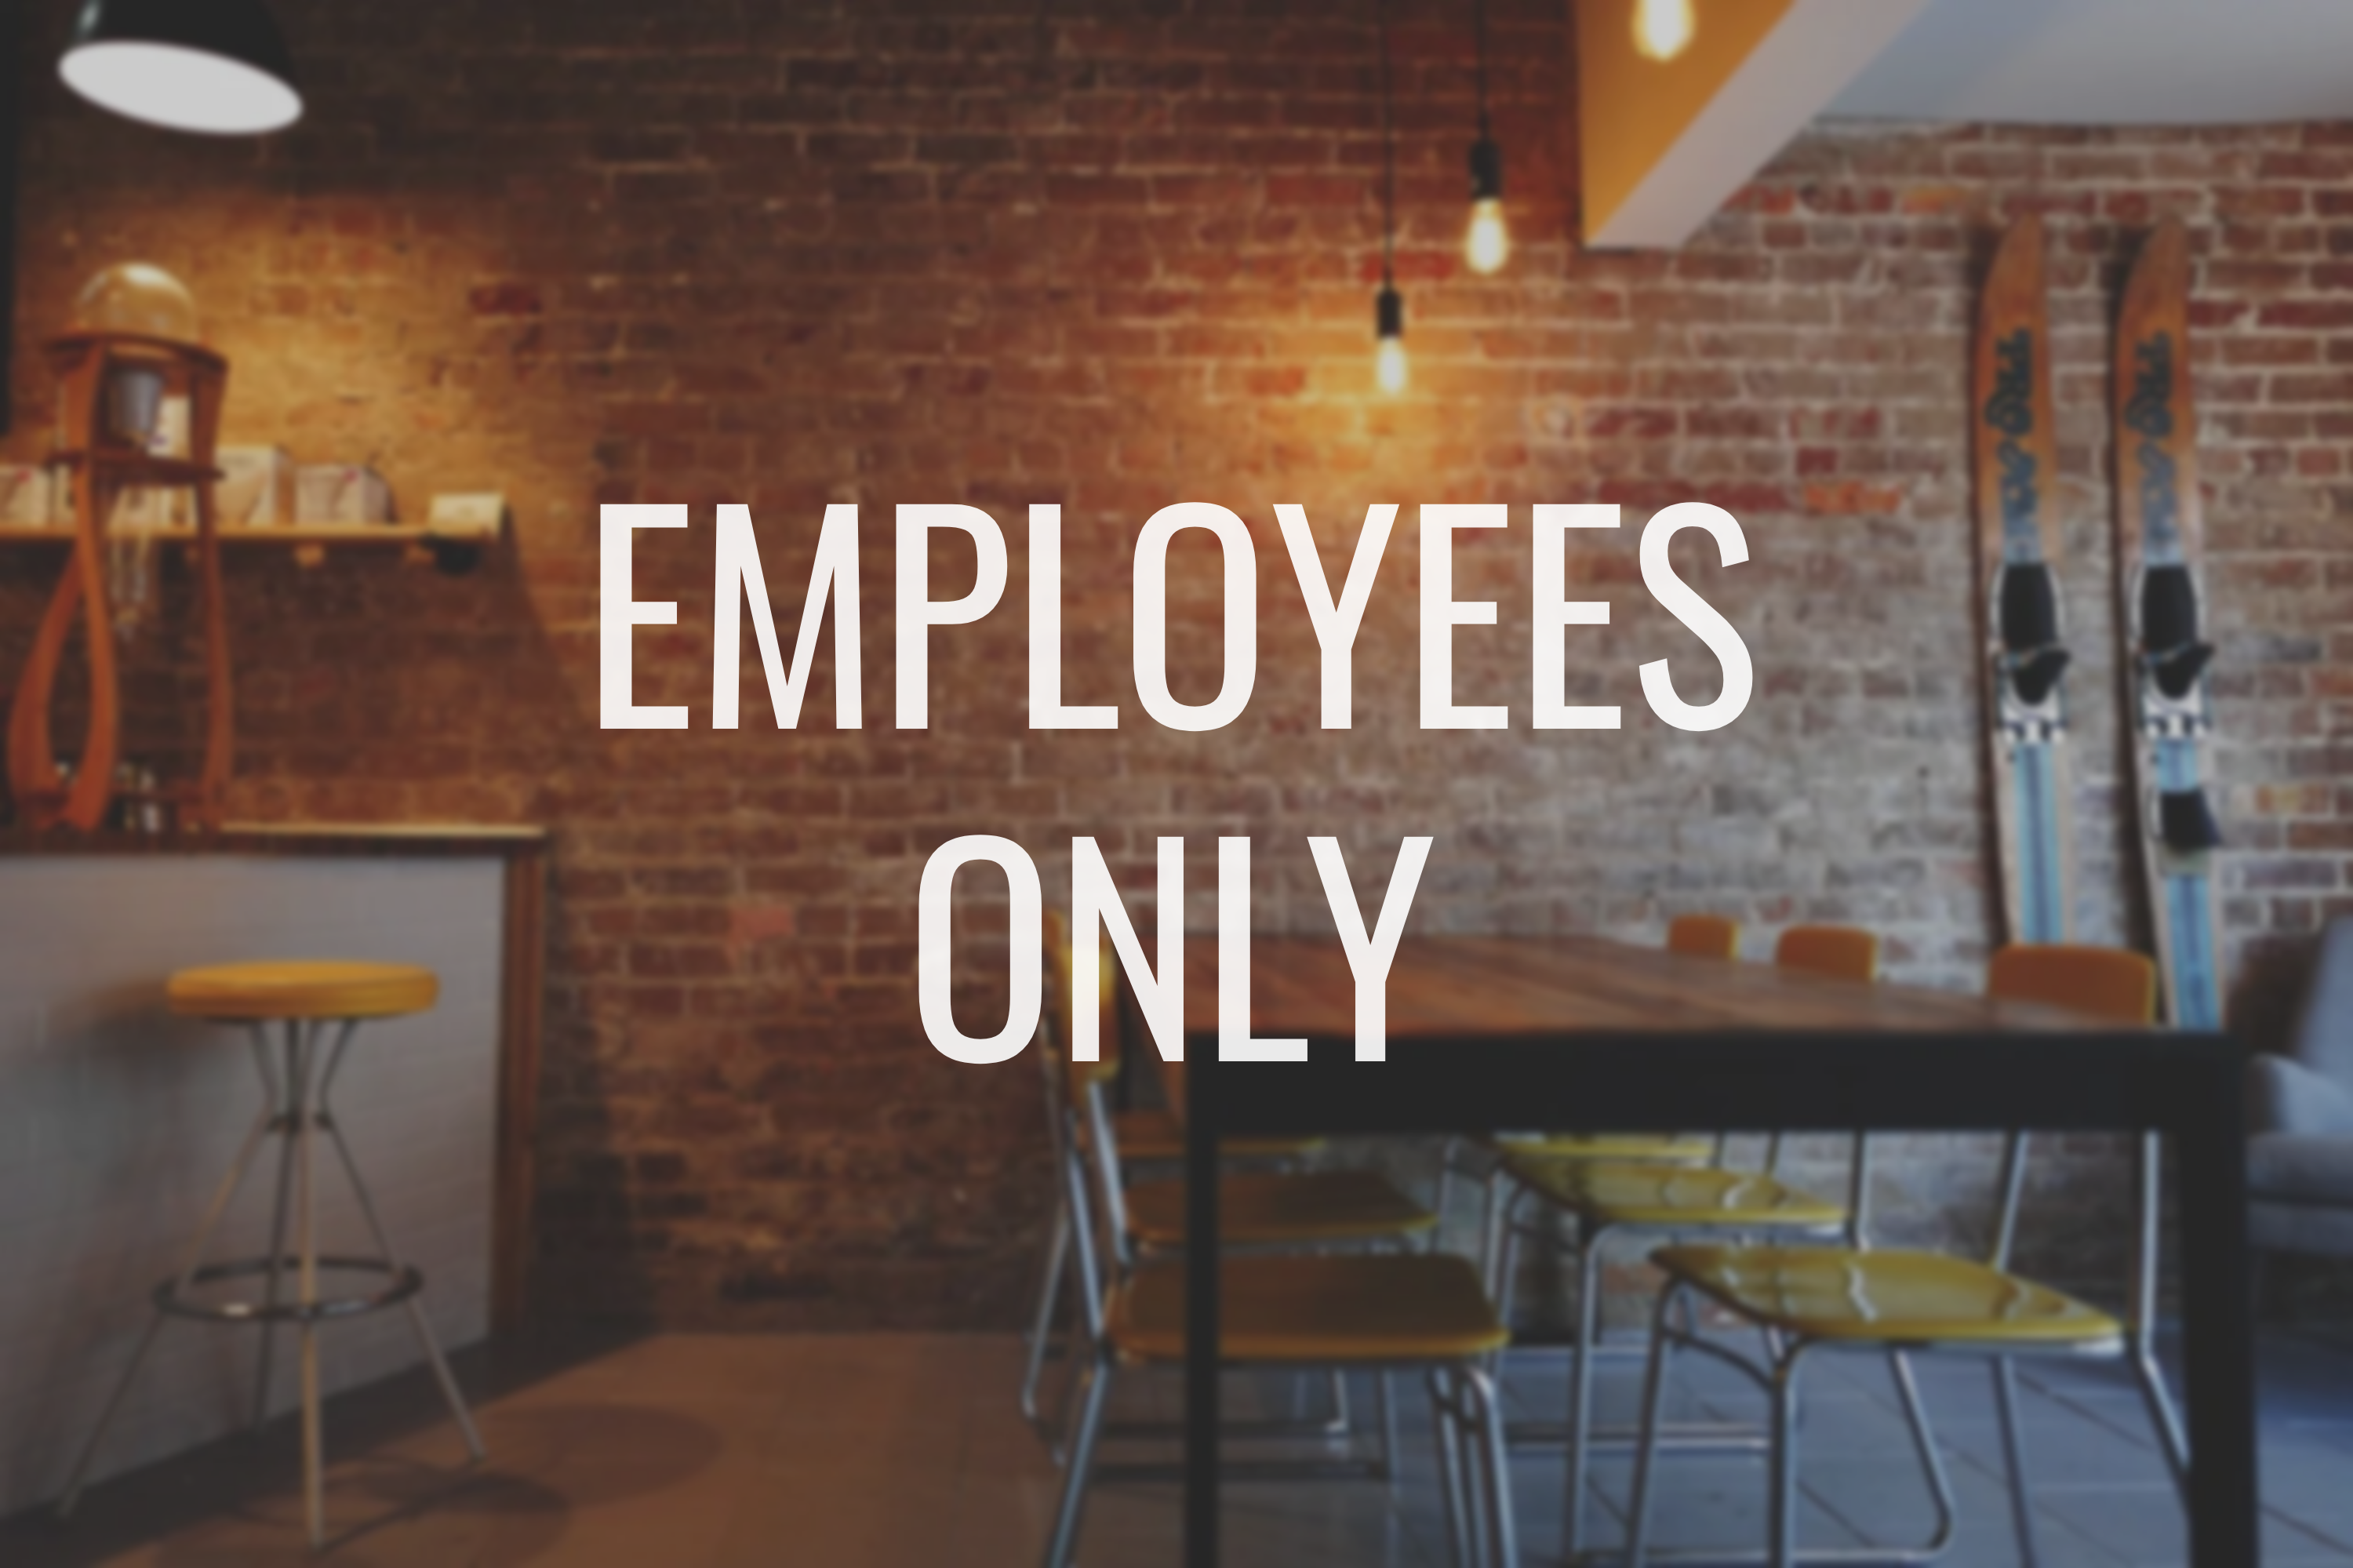 Employees Only Decal - Vinyl Sticker for Businesses, Stores, Bars, Coffee Shops, Eatery, Cafeteria, Food Truck!